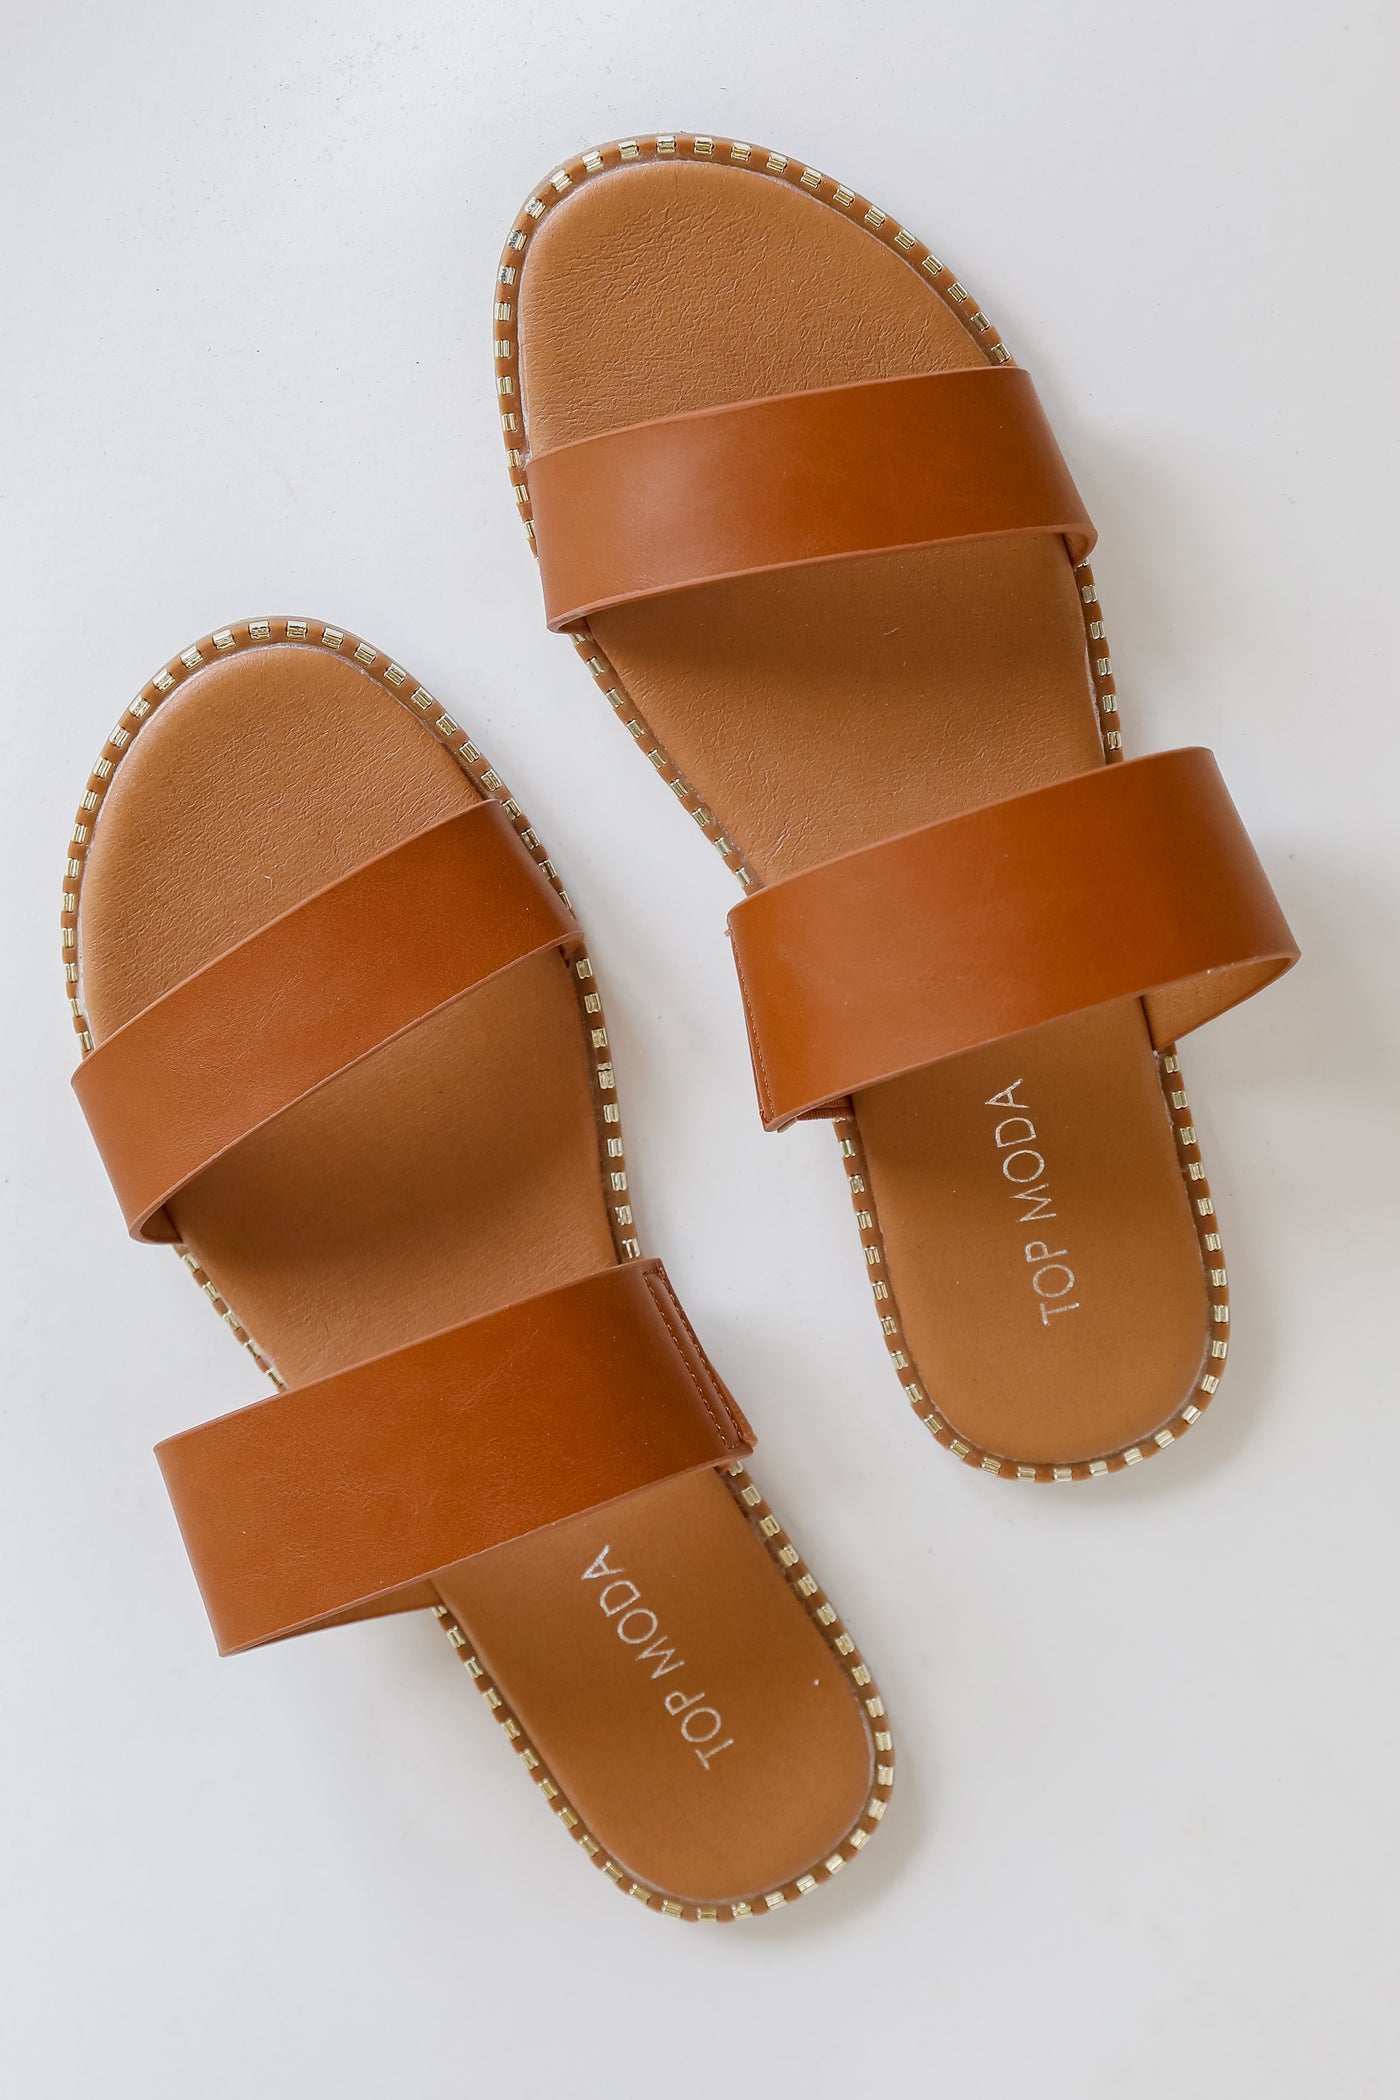 Double Strap Sandals in tan flat lay